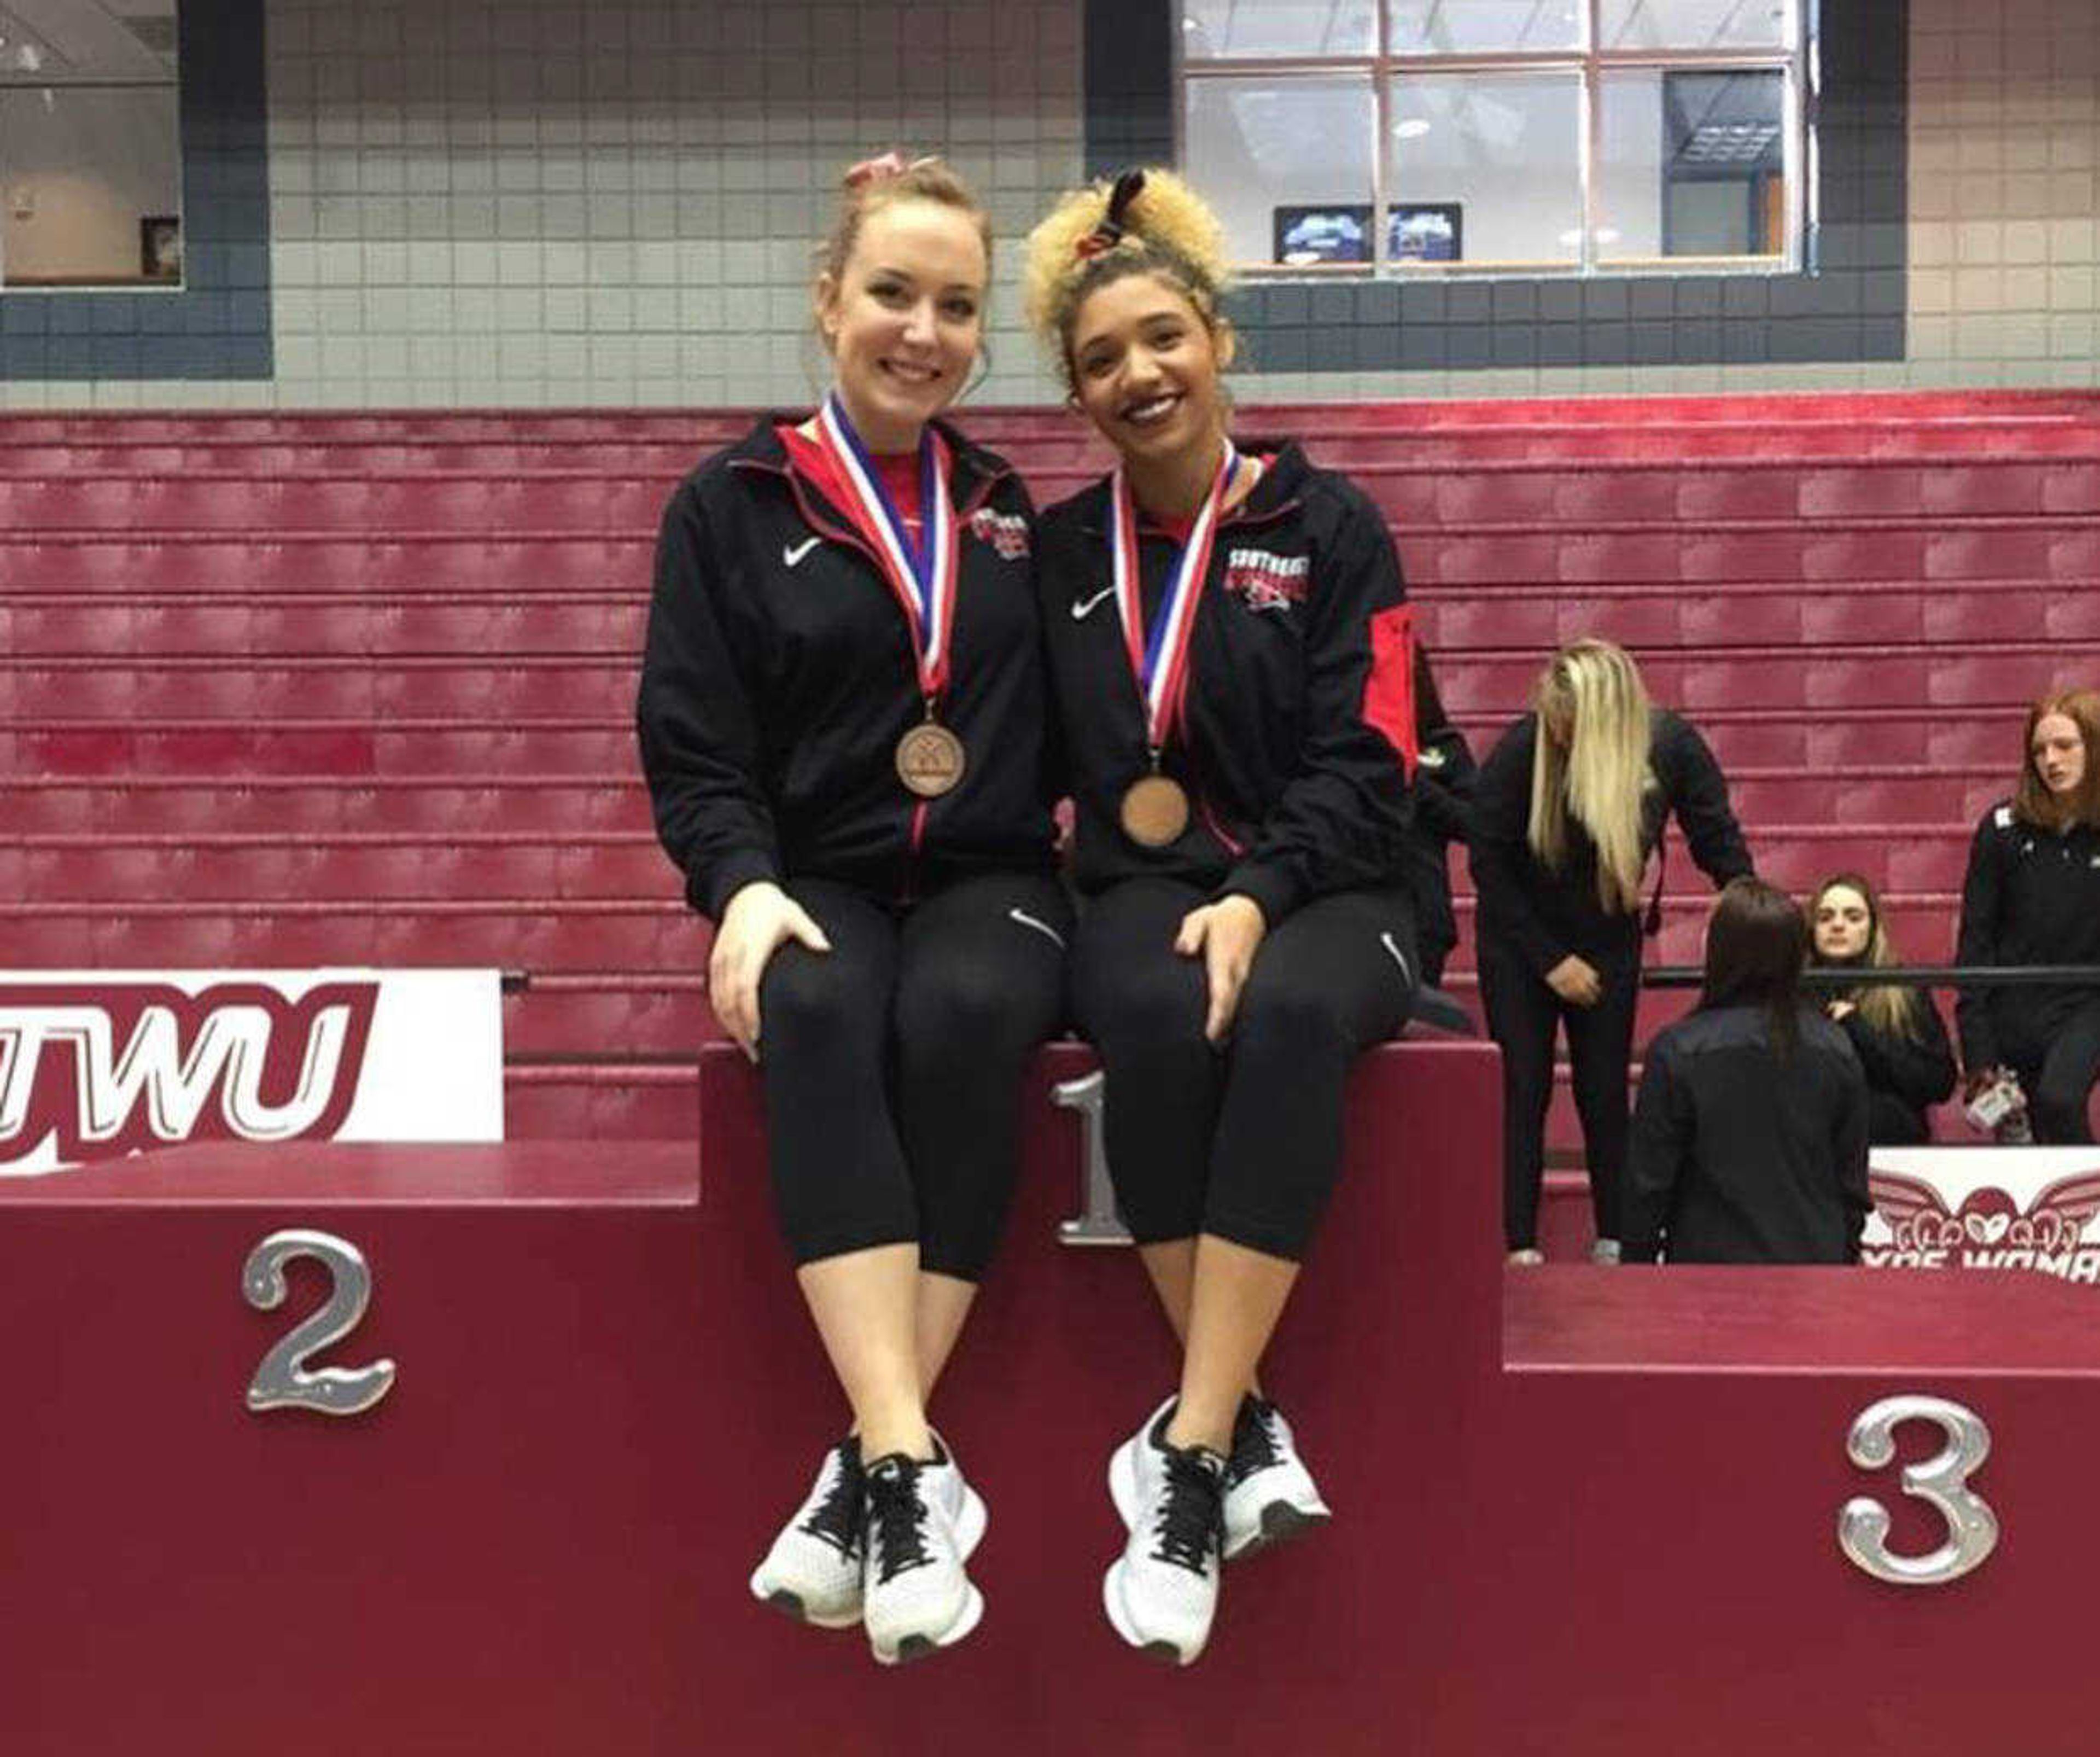 Southeast gymnastics first time competing at the national championship